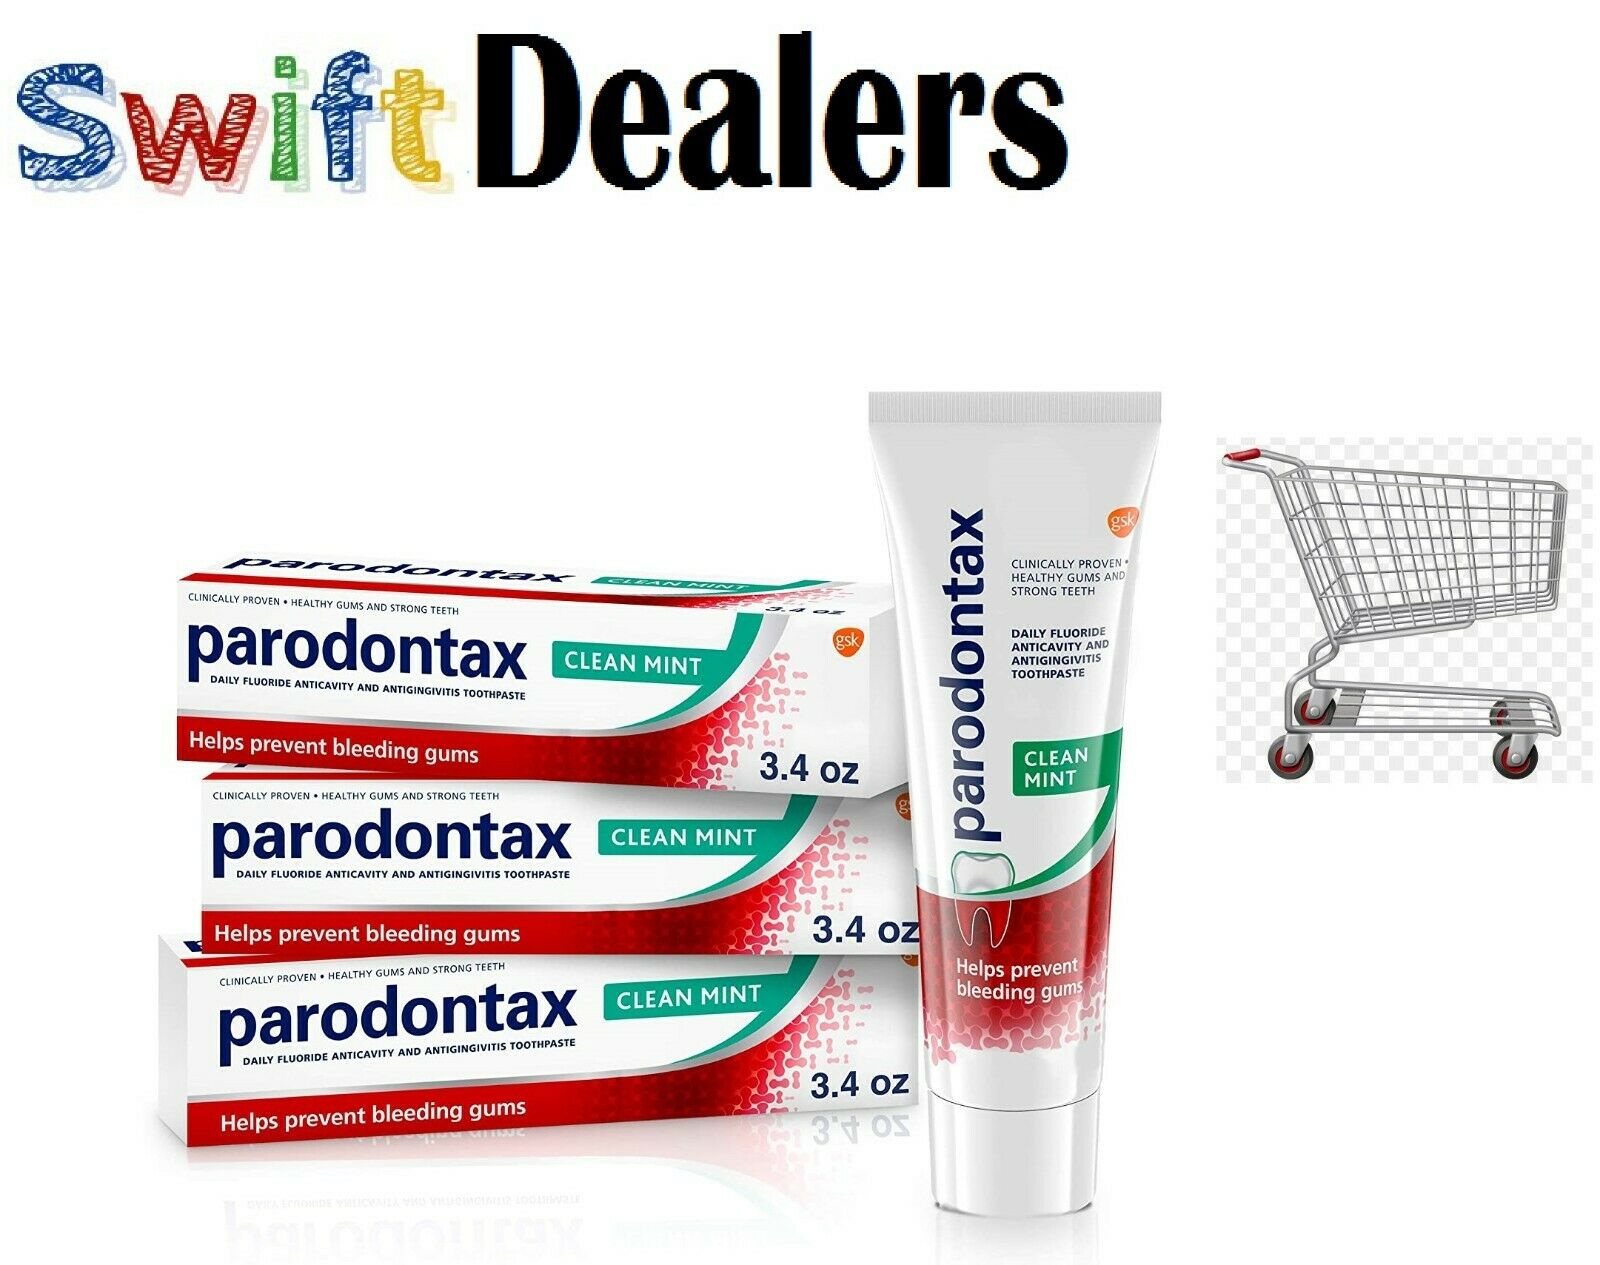 Parodontax Toothpaste for Bleeding Gums, Gingivitis Treatment and Cavity Clean -